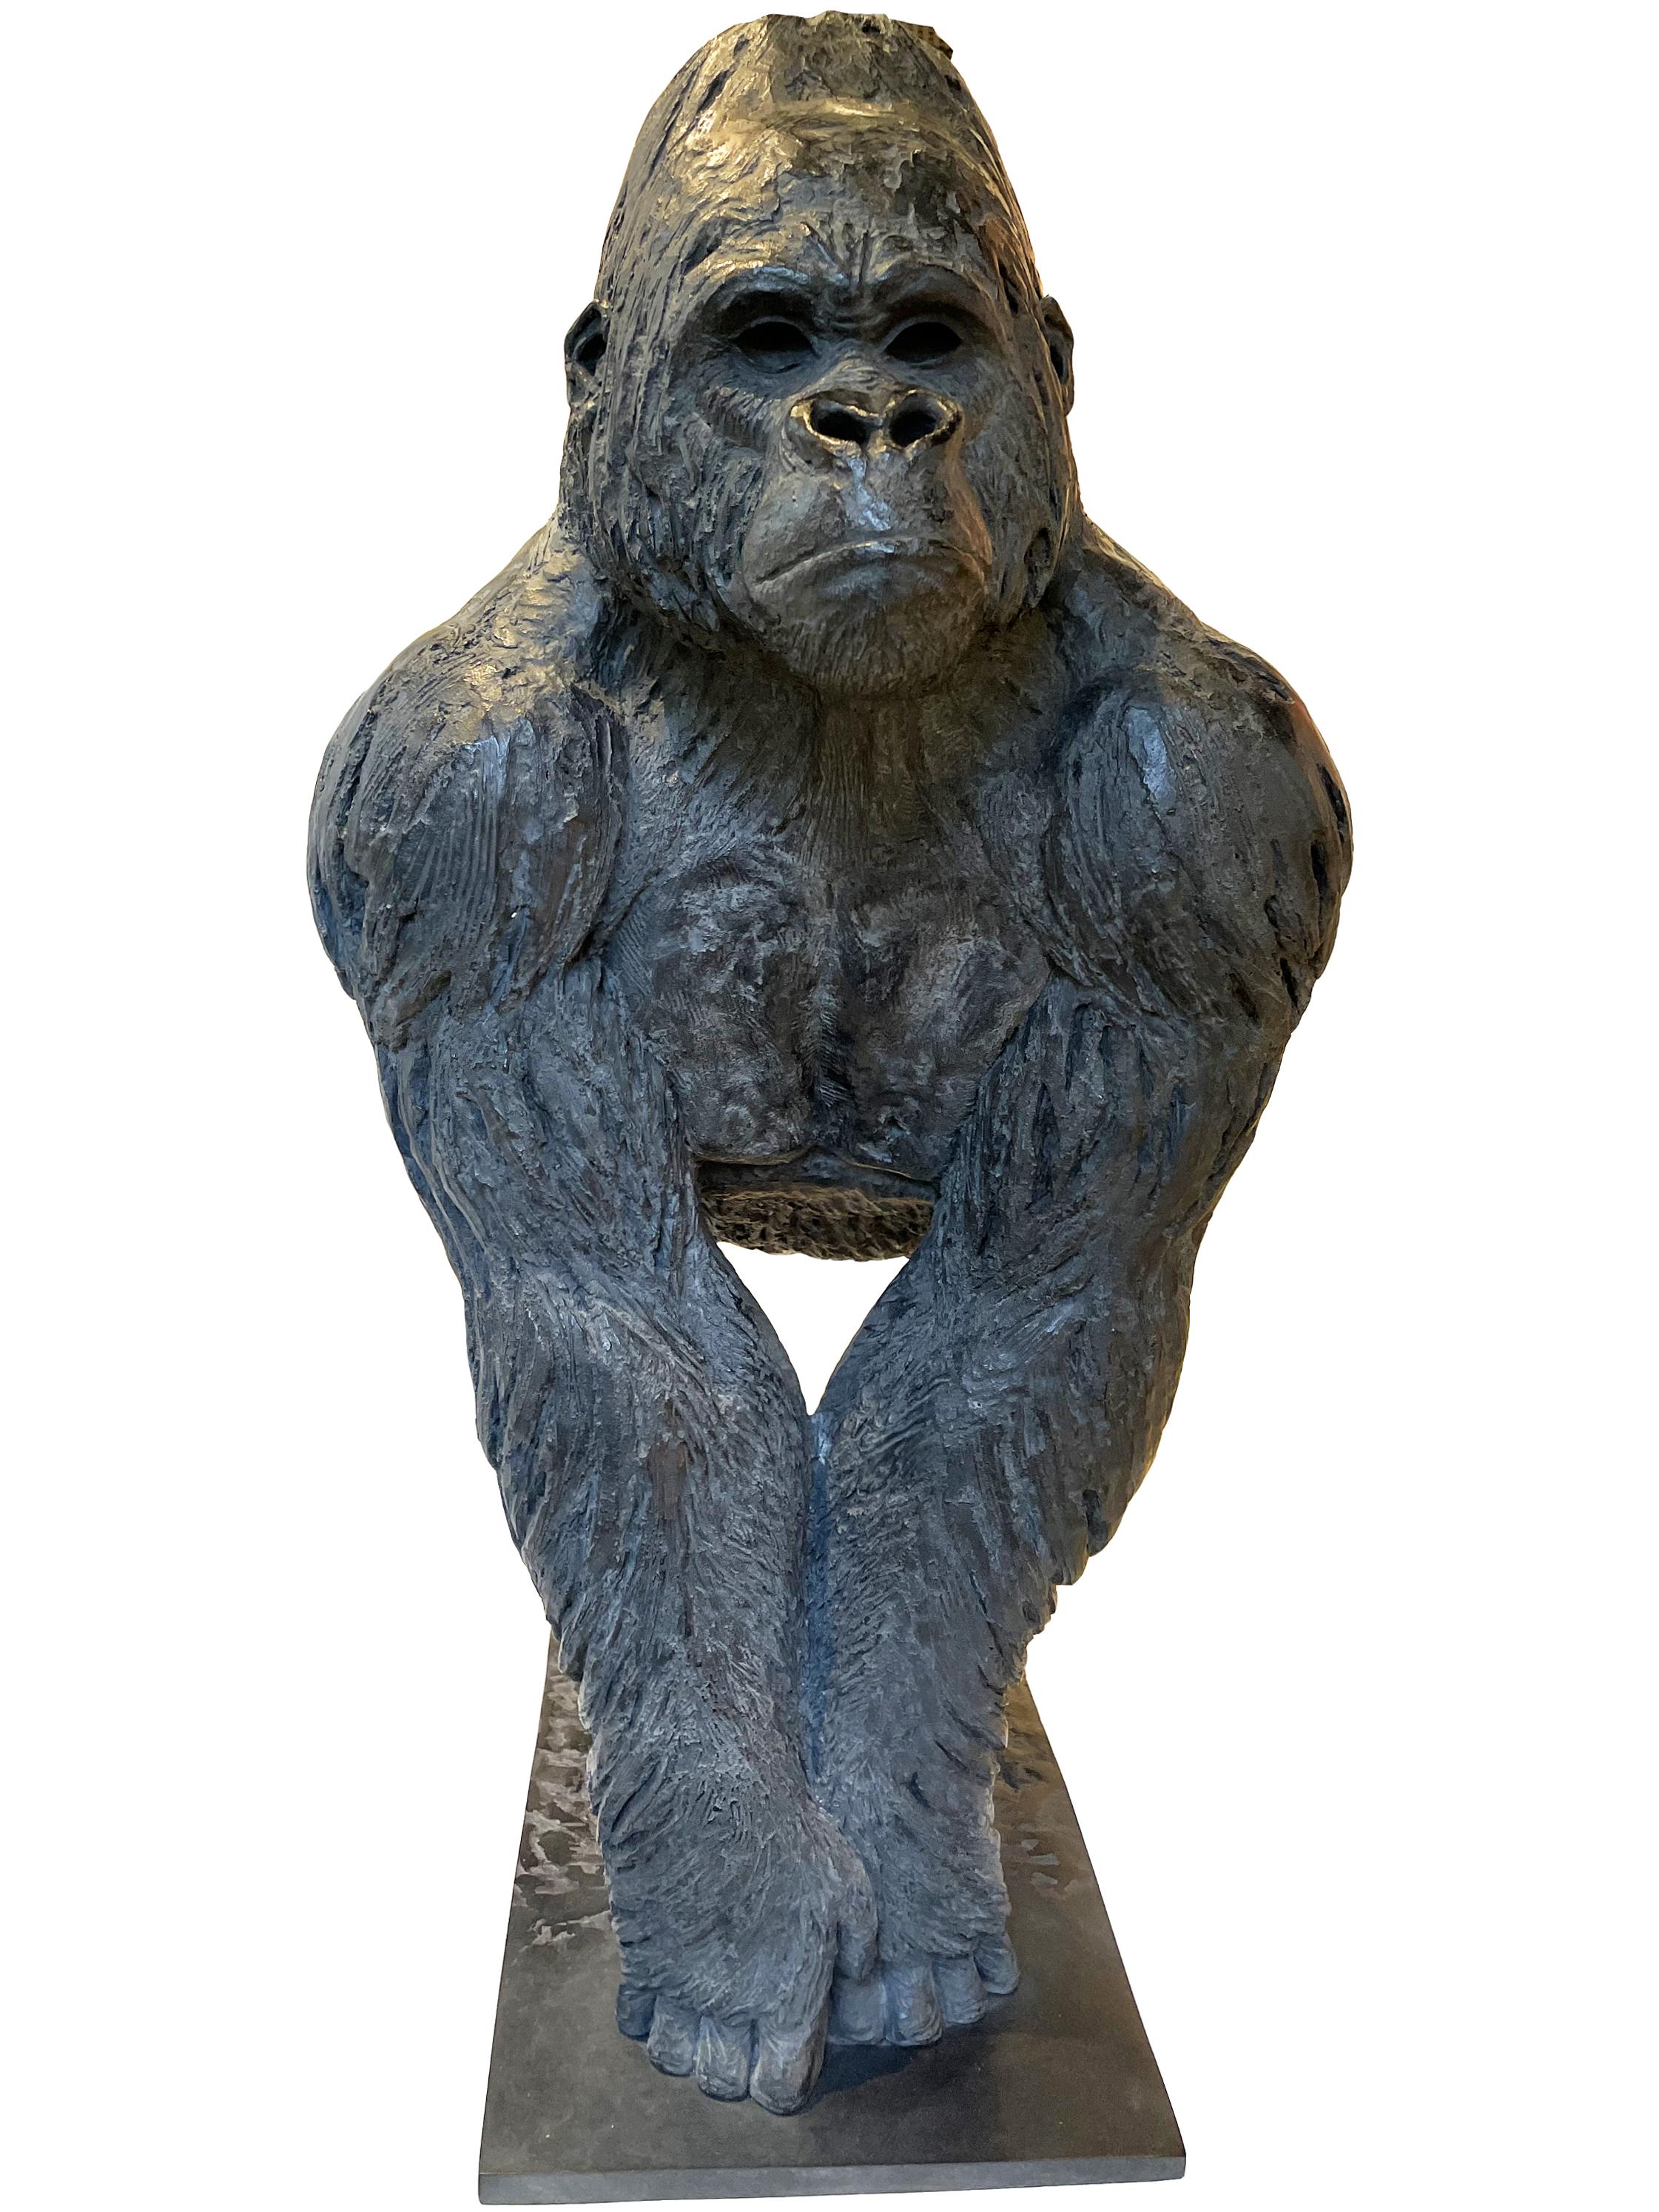 21st Century Gorilla sculpture CONGO by Jean-Pierre Chabert from France

Bronze Sculpture
Gorilla bust
Rosini Foundry

OUR STATEMENT 

“Pierre Jean Chabert shakes the codes of animal sculpture in each one of his creations. 

His Art, identifiable at